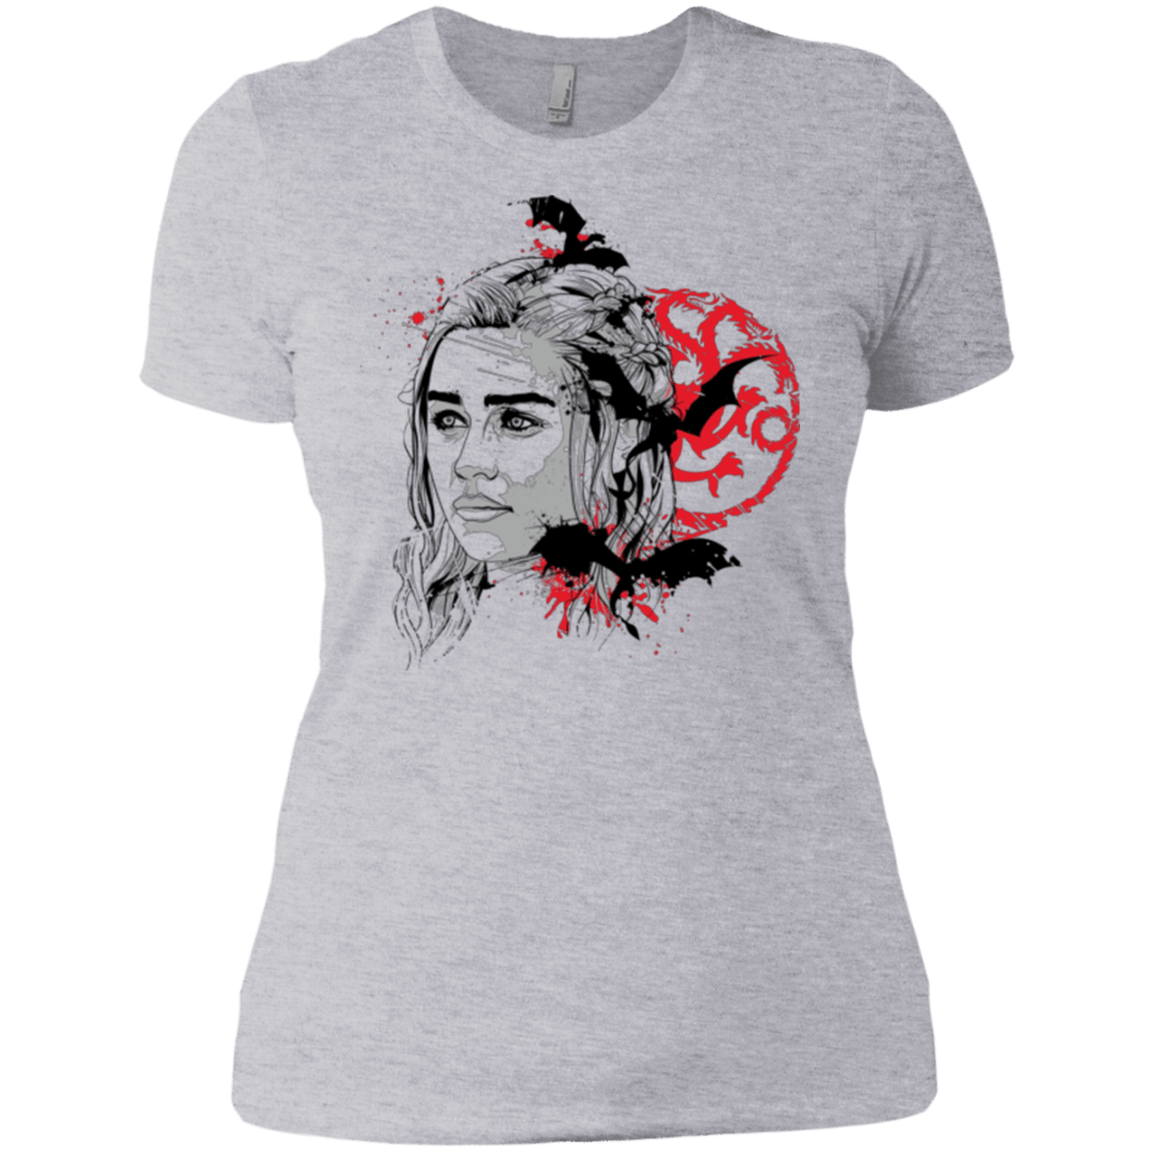 T-Shirts Heather Grey / X-Small MOTHER OF DRAGONS (1) Women's Premium T-Shirt